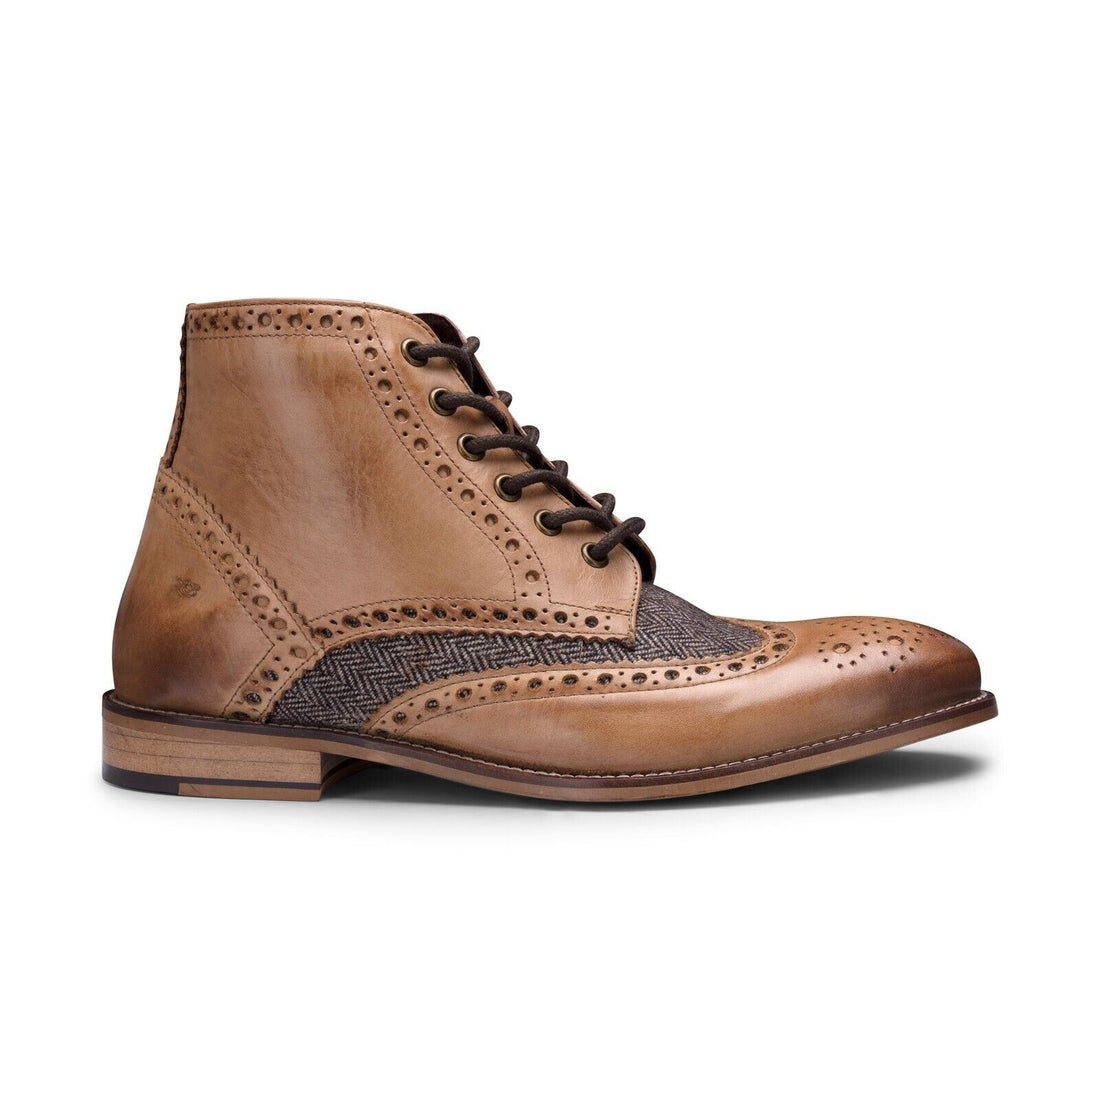 Mens Classic Oxford Tan Leather Gatsby Brogue Ankle Boots with Tweed - Upperclass Fashions 